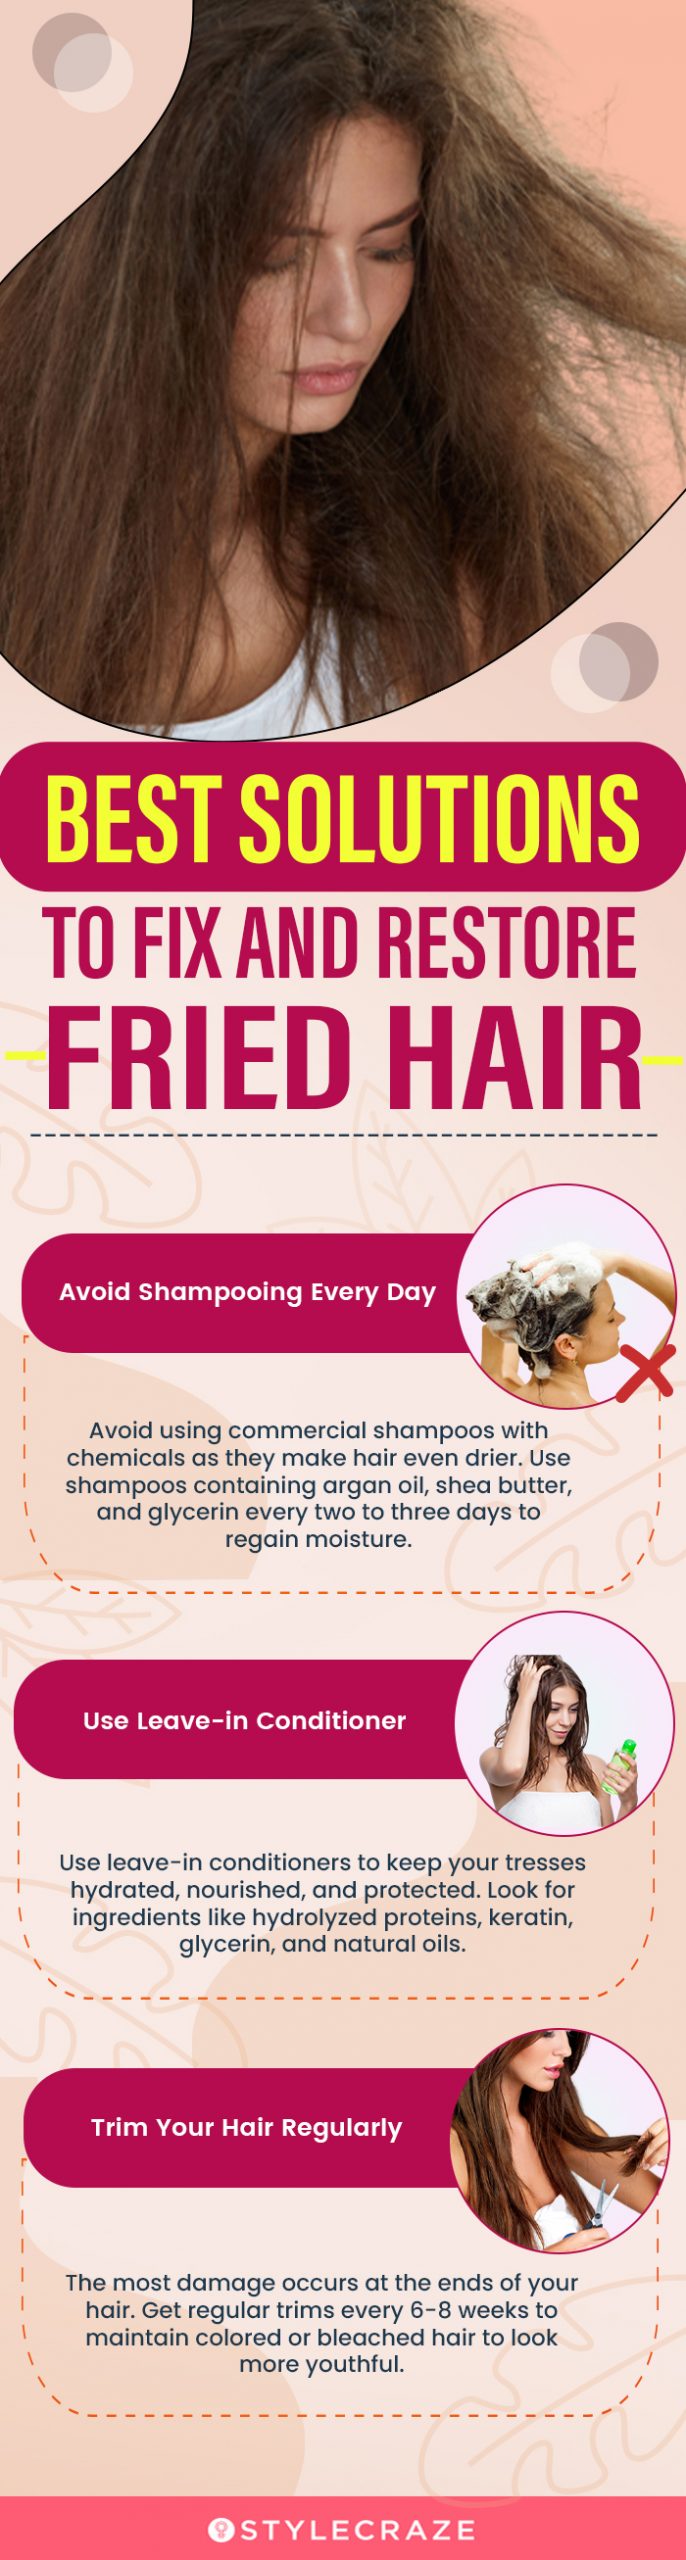 best solutions to fix and restore fried hair (infographic)